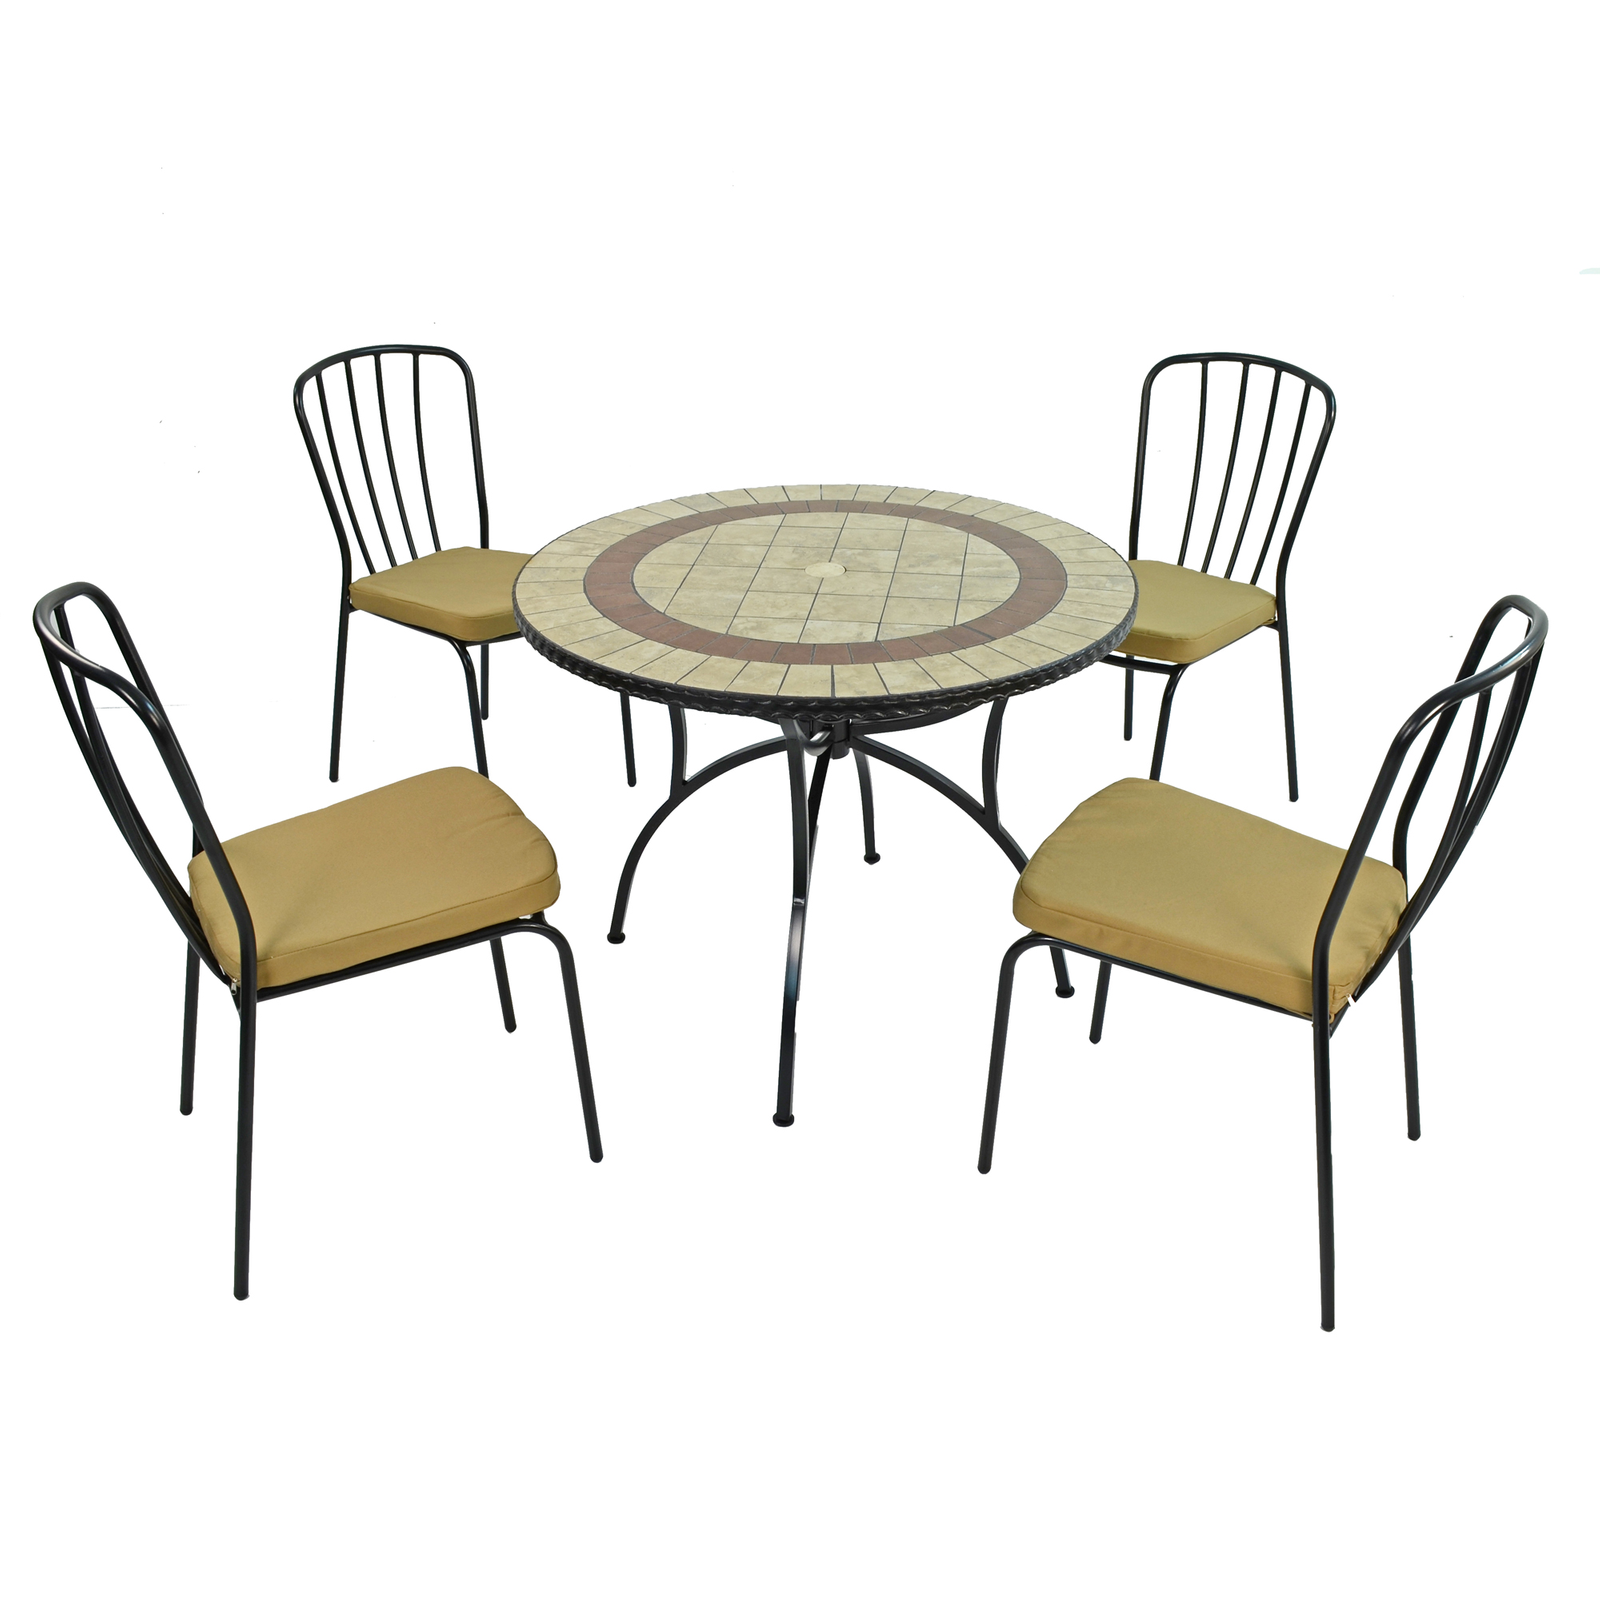 Exclusive Garden Henley 91cm Patio With 4 Milan Chairs Set Dining Sets Exclusive Garden   